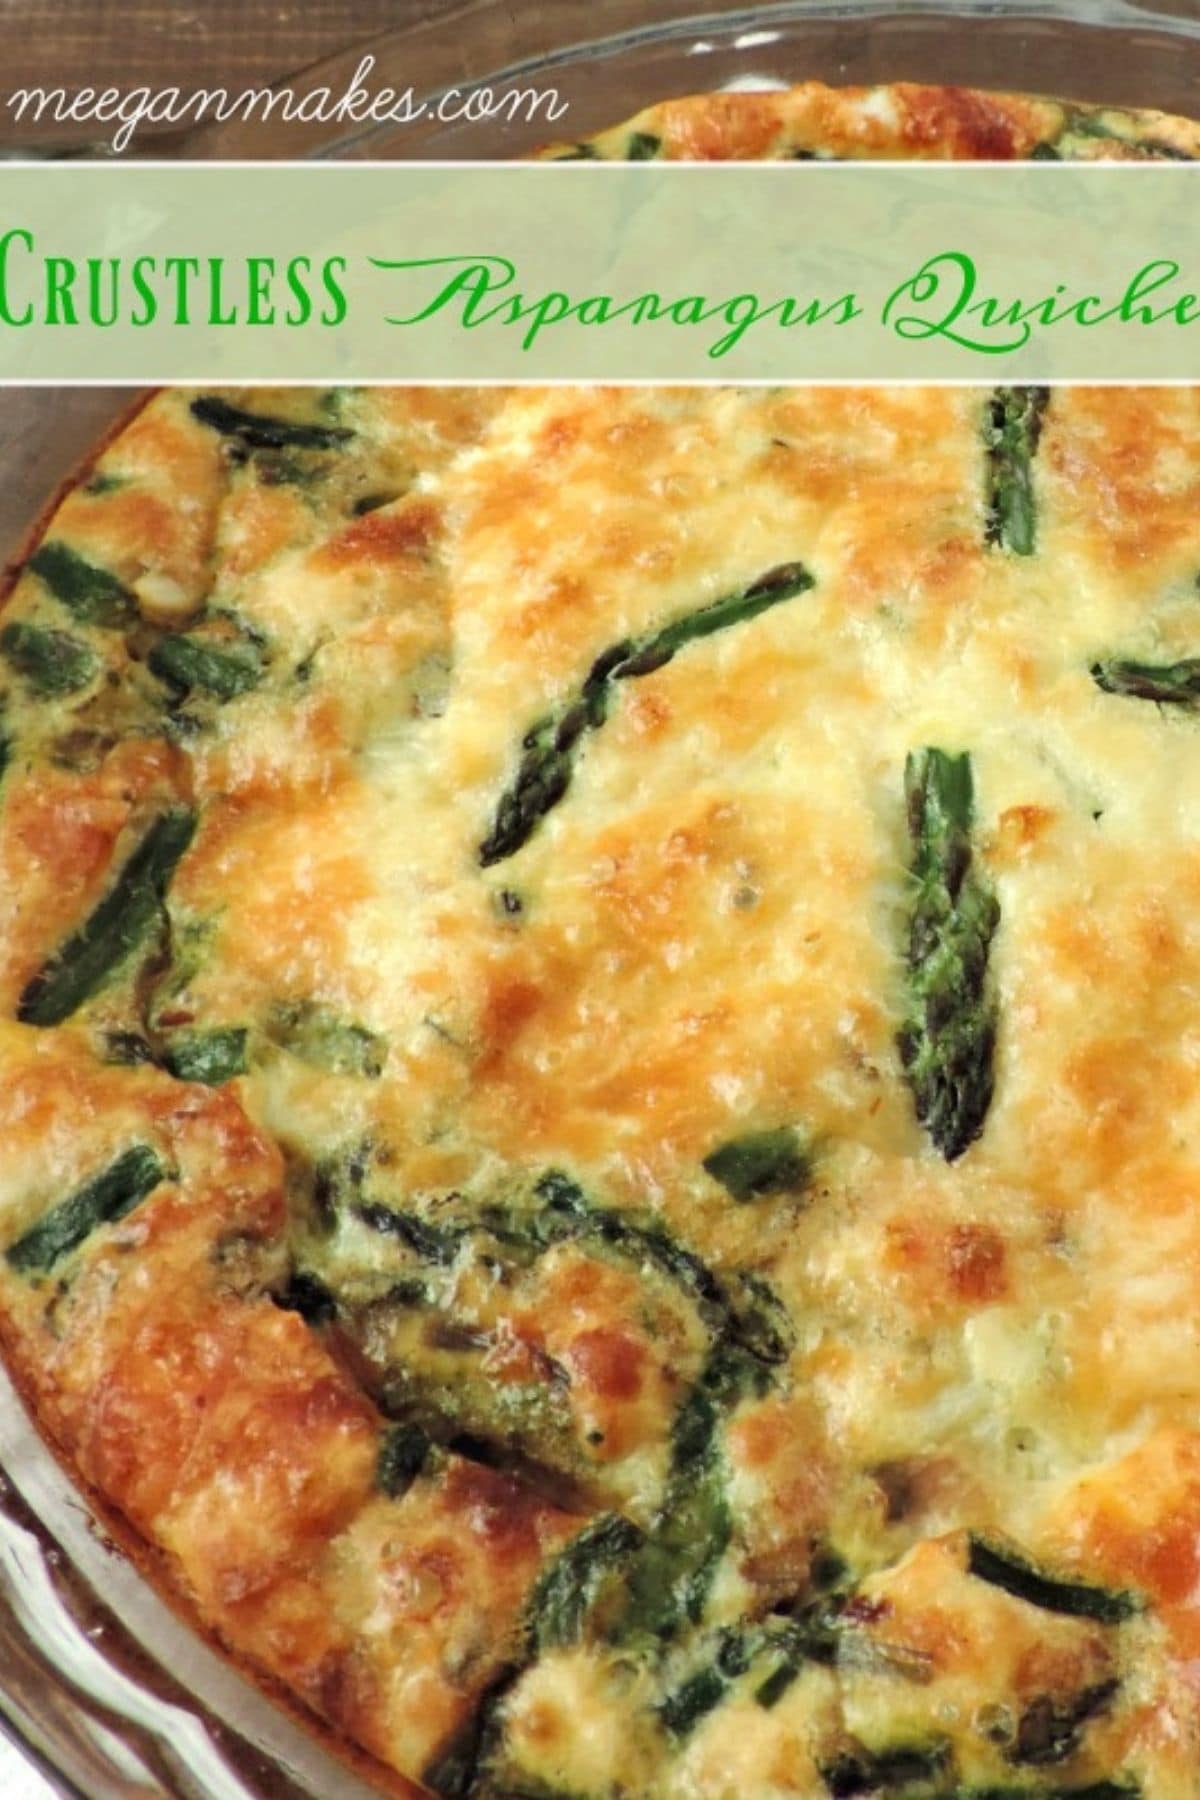 Top of quiche with asparagus showing